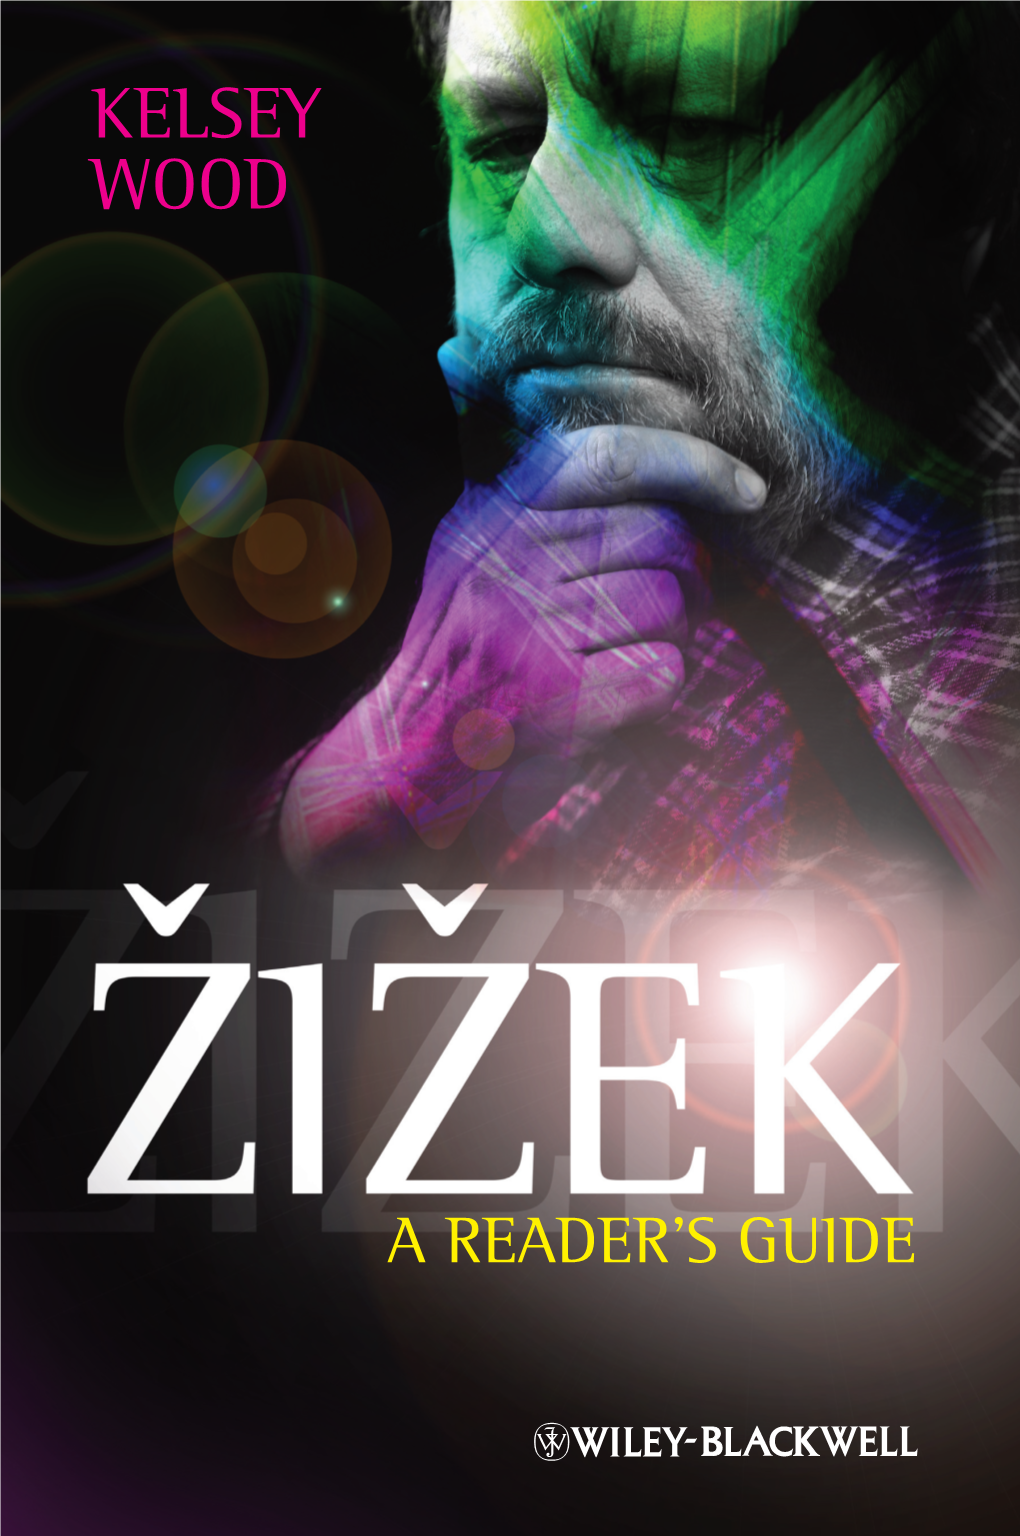 KELSEY WOOD KELSEY a READER’S GUIDE WOOD “Wood Provides an Excellent Guidebook Through Žižek’S Thought